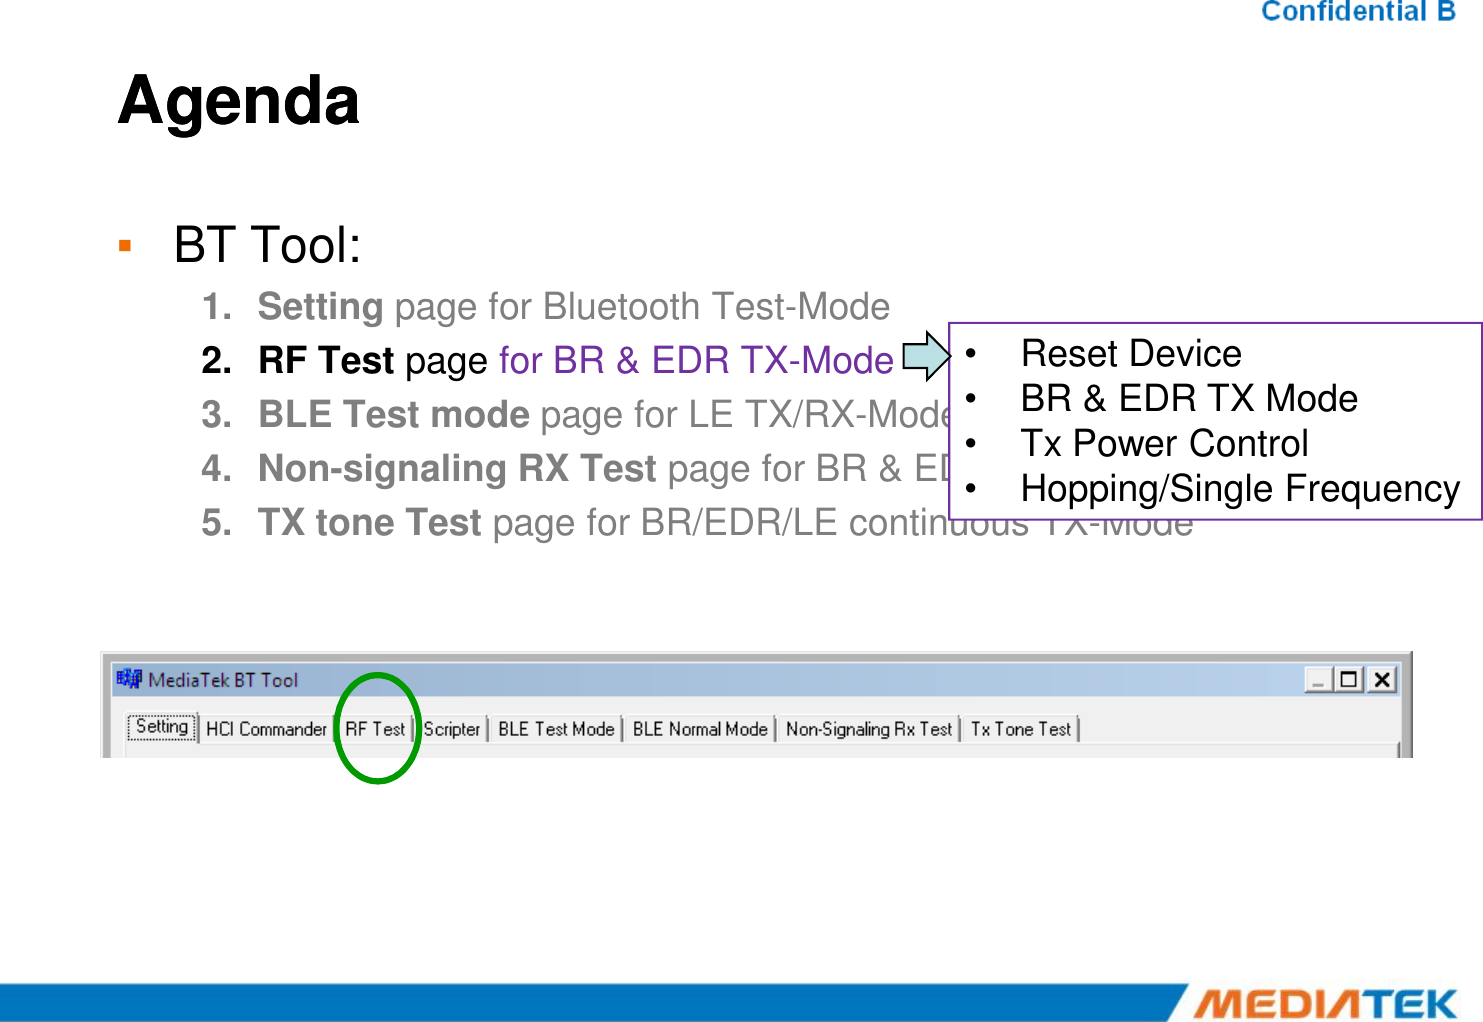 AgendaAgenda▪BT Tool:1.Setting page for Bluetooth Test-Mode 2.RF Test page for BR &amp; EDR TX-Mode 3.BLE Test mode page for LE TX/RX-Mode 4.Non-signaling RX Test page for BR &amp; EDR RX-Mode 5.TX tone Test page for BR/EDR/LE continuous TX-Mode •Reset Device•BR &amp; EDR TX Mode•Tx Power Control•Hopping/Single Frequency5.TX tone Test page for BR/EDR/LE continuous TX-Mode 